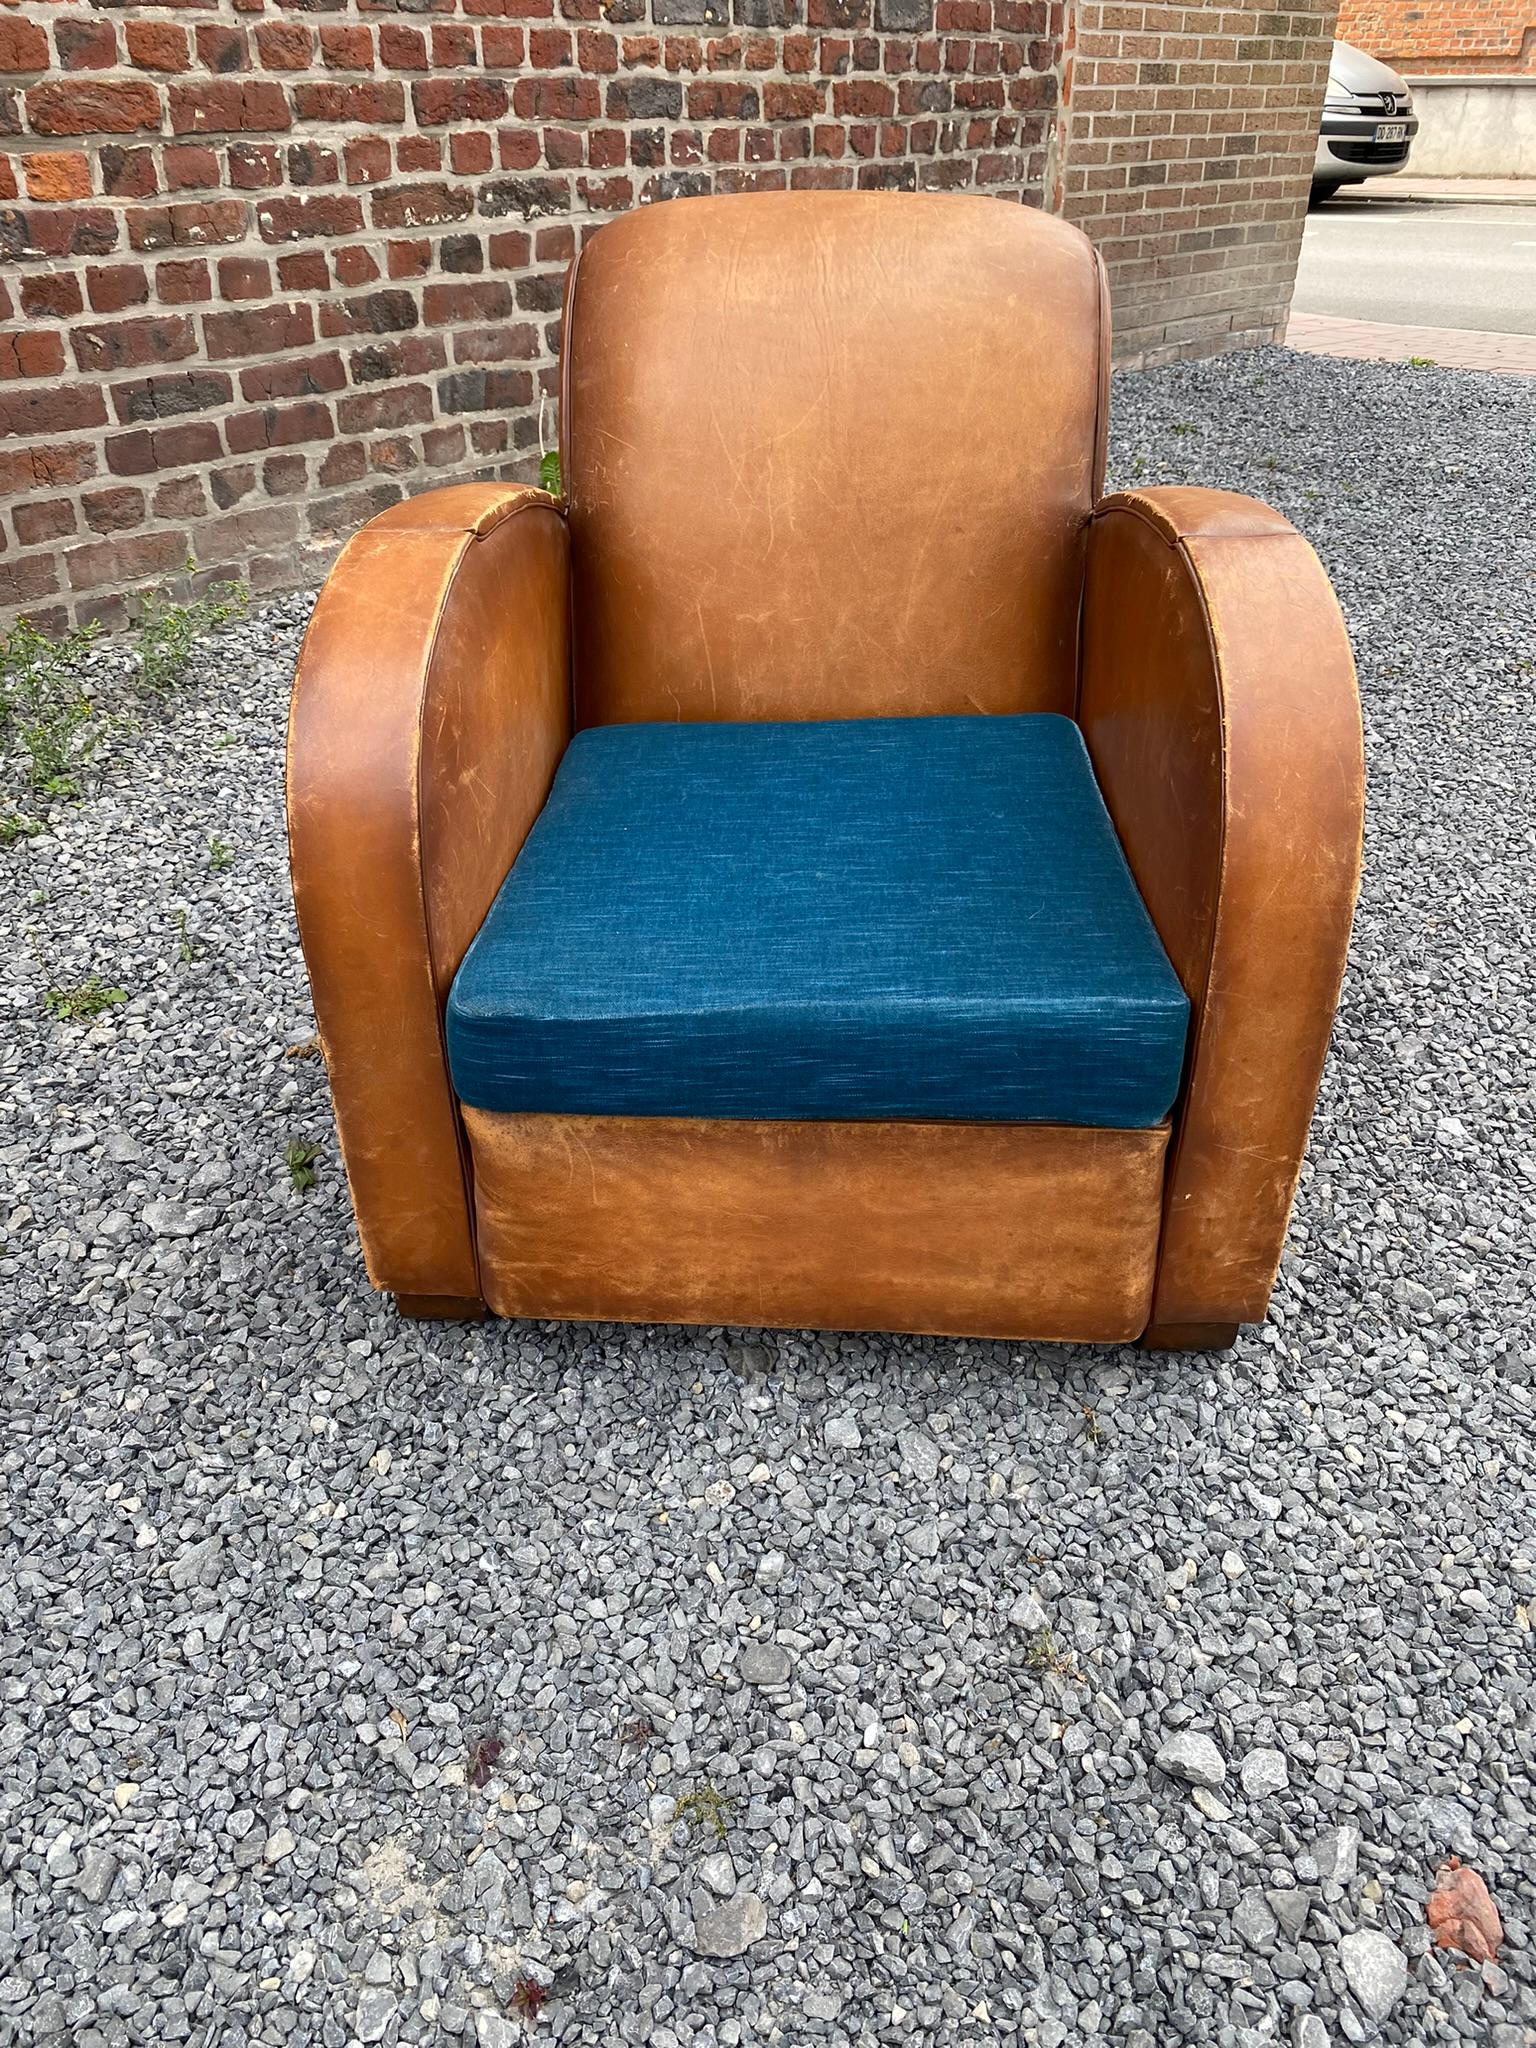 Art Deco Armchairs Covered in Leather, circa 1930 For Sale 1